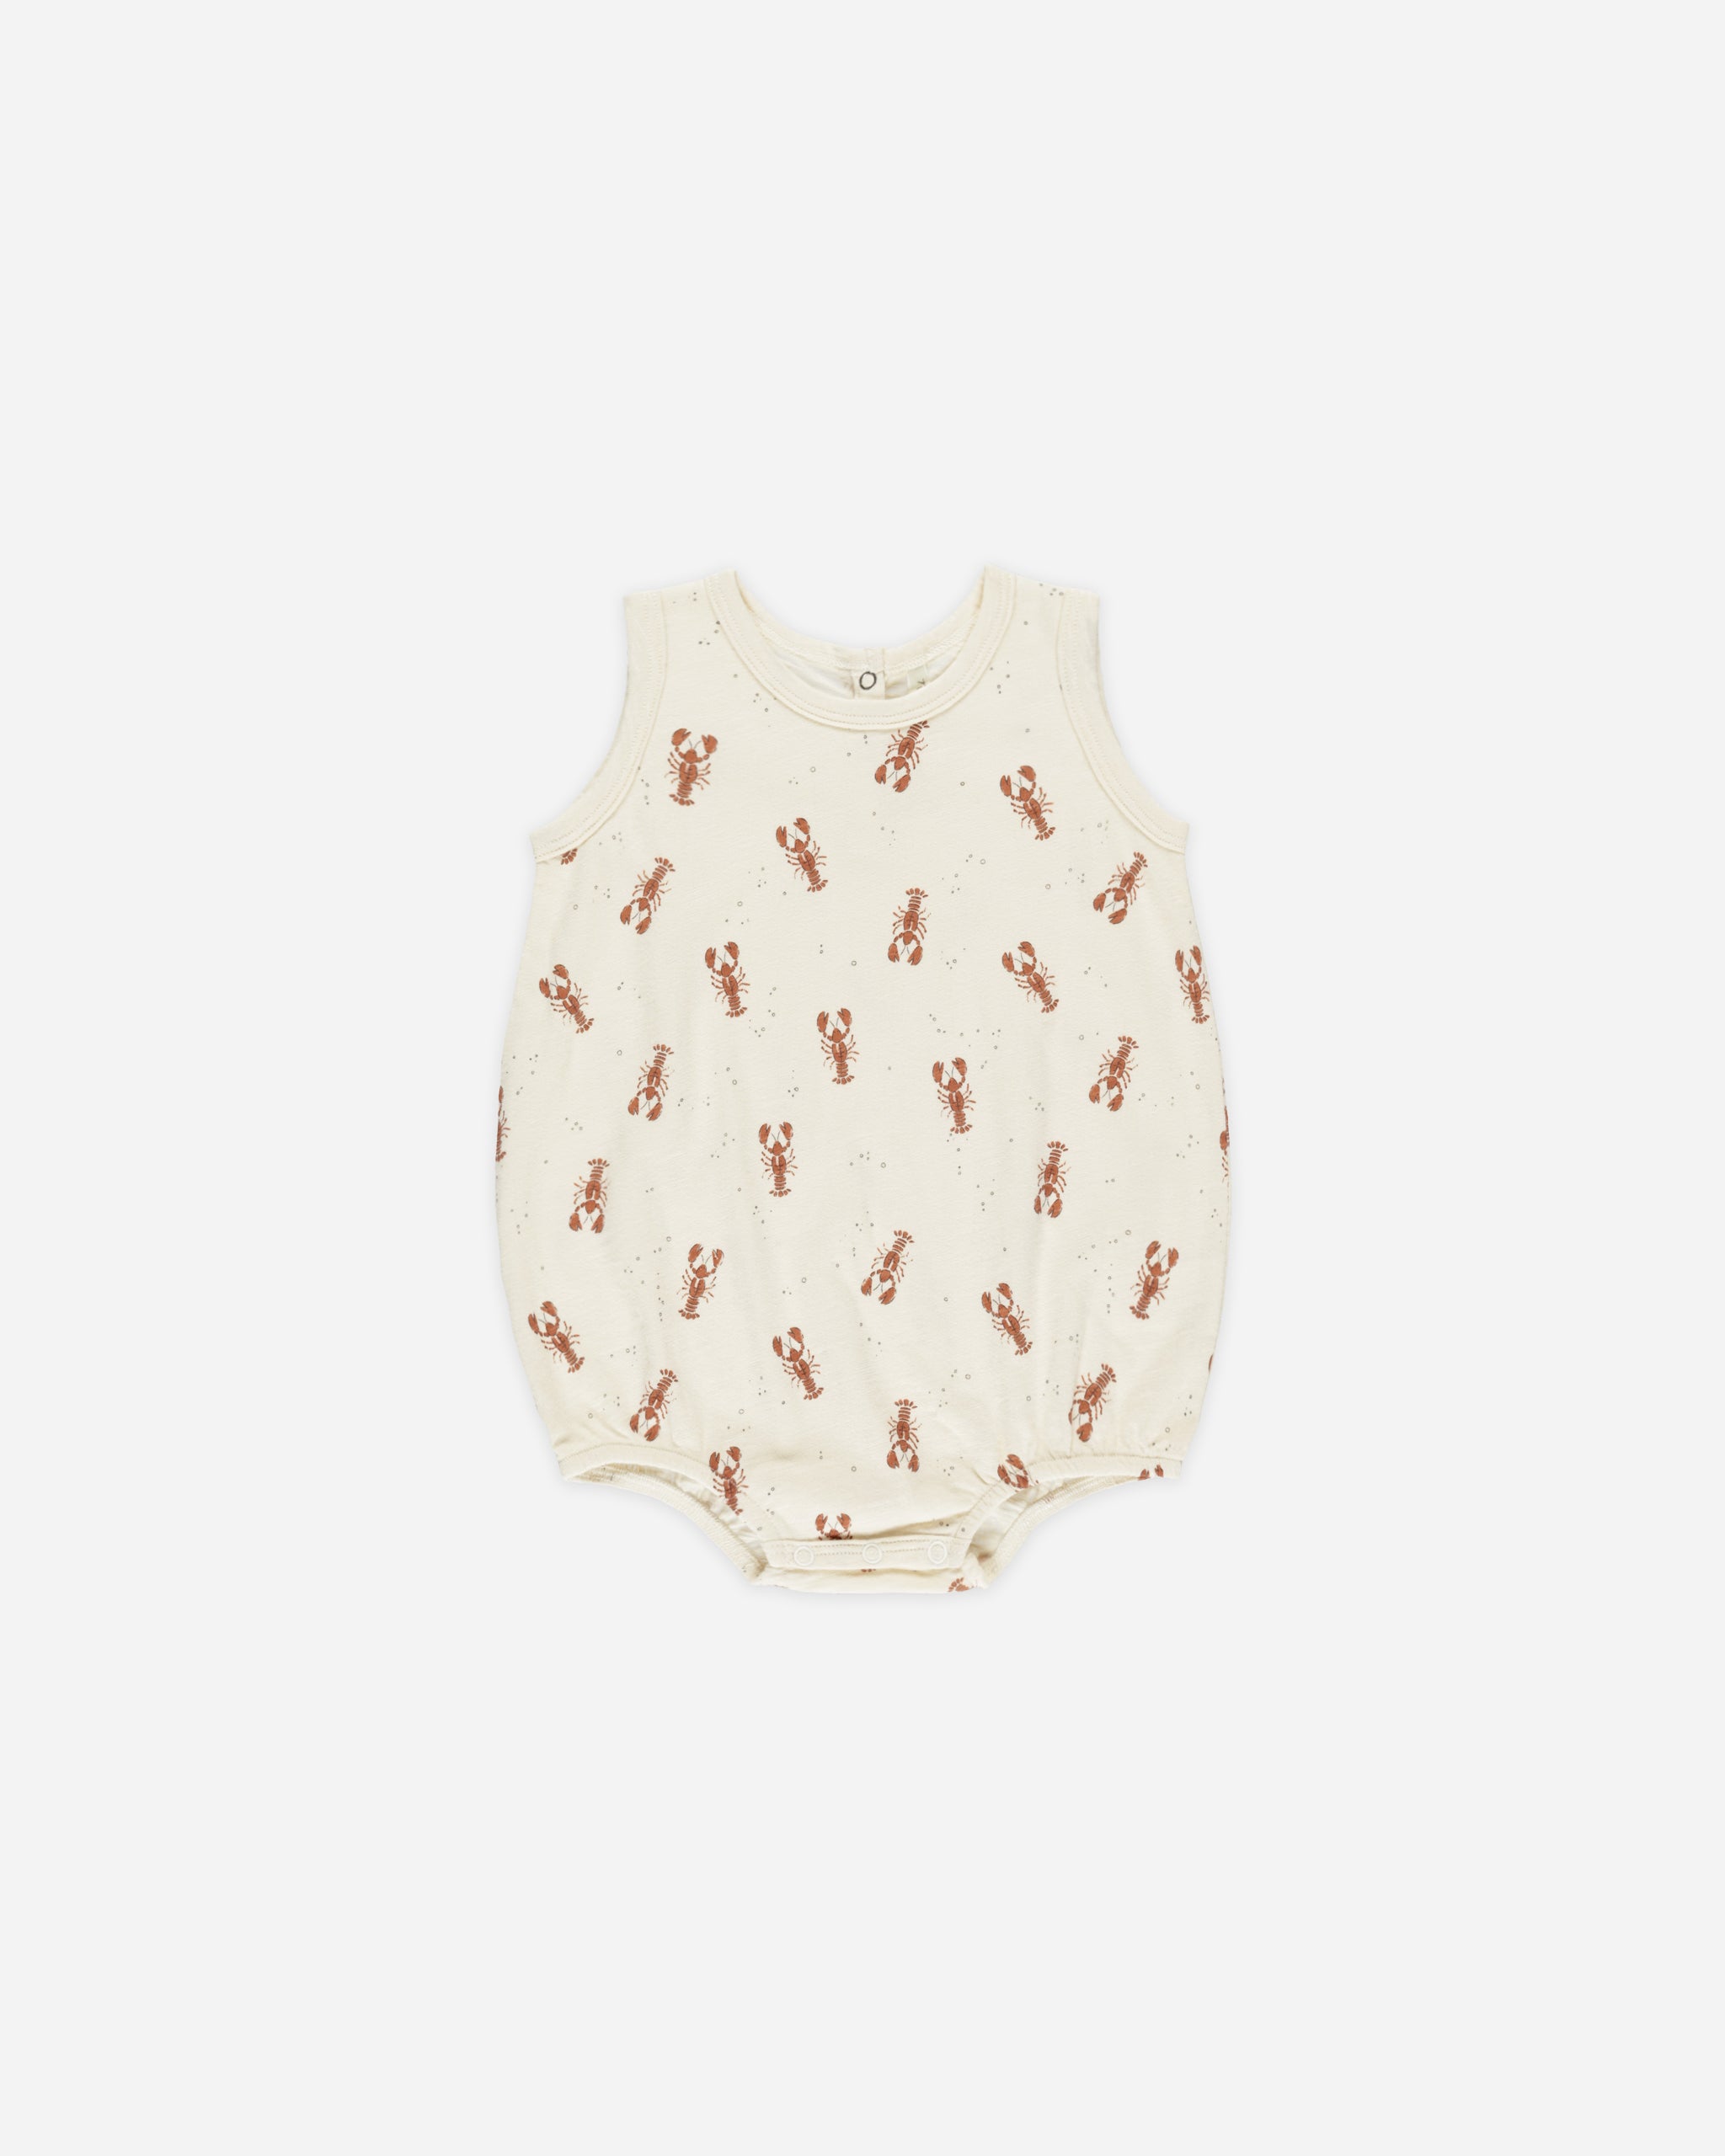 Bubble Onesie || Lobsters - Rylee + Cru | Kids Clothes | Trendy Baby Clothes | Modern Infant Outfits |